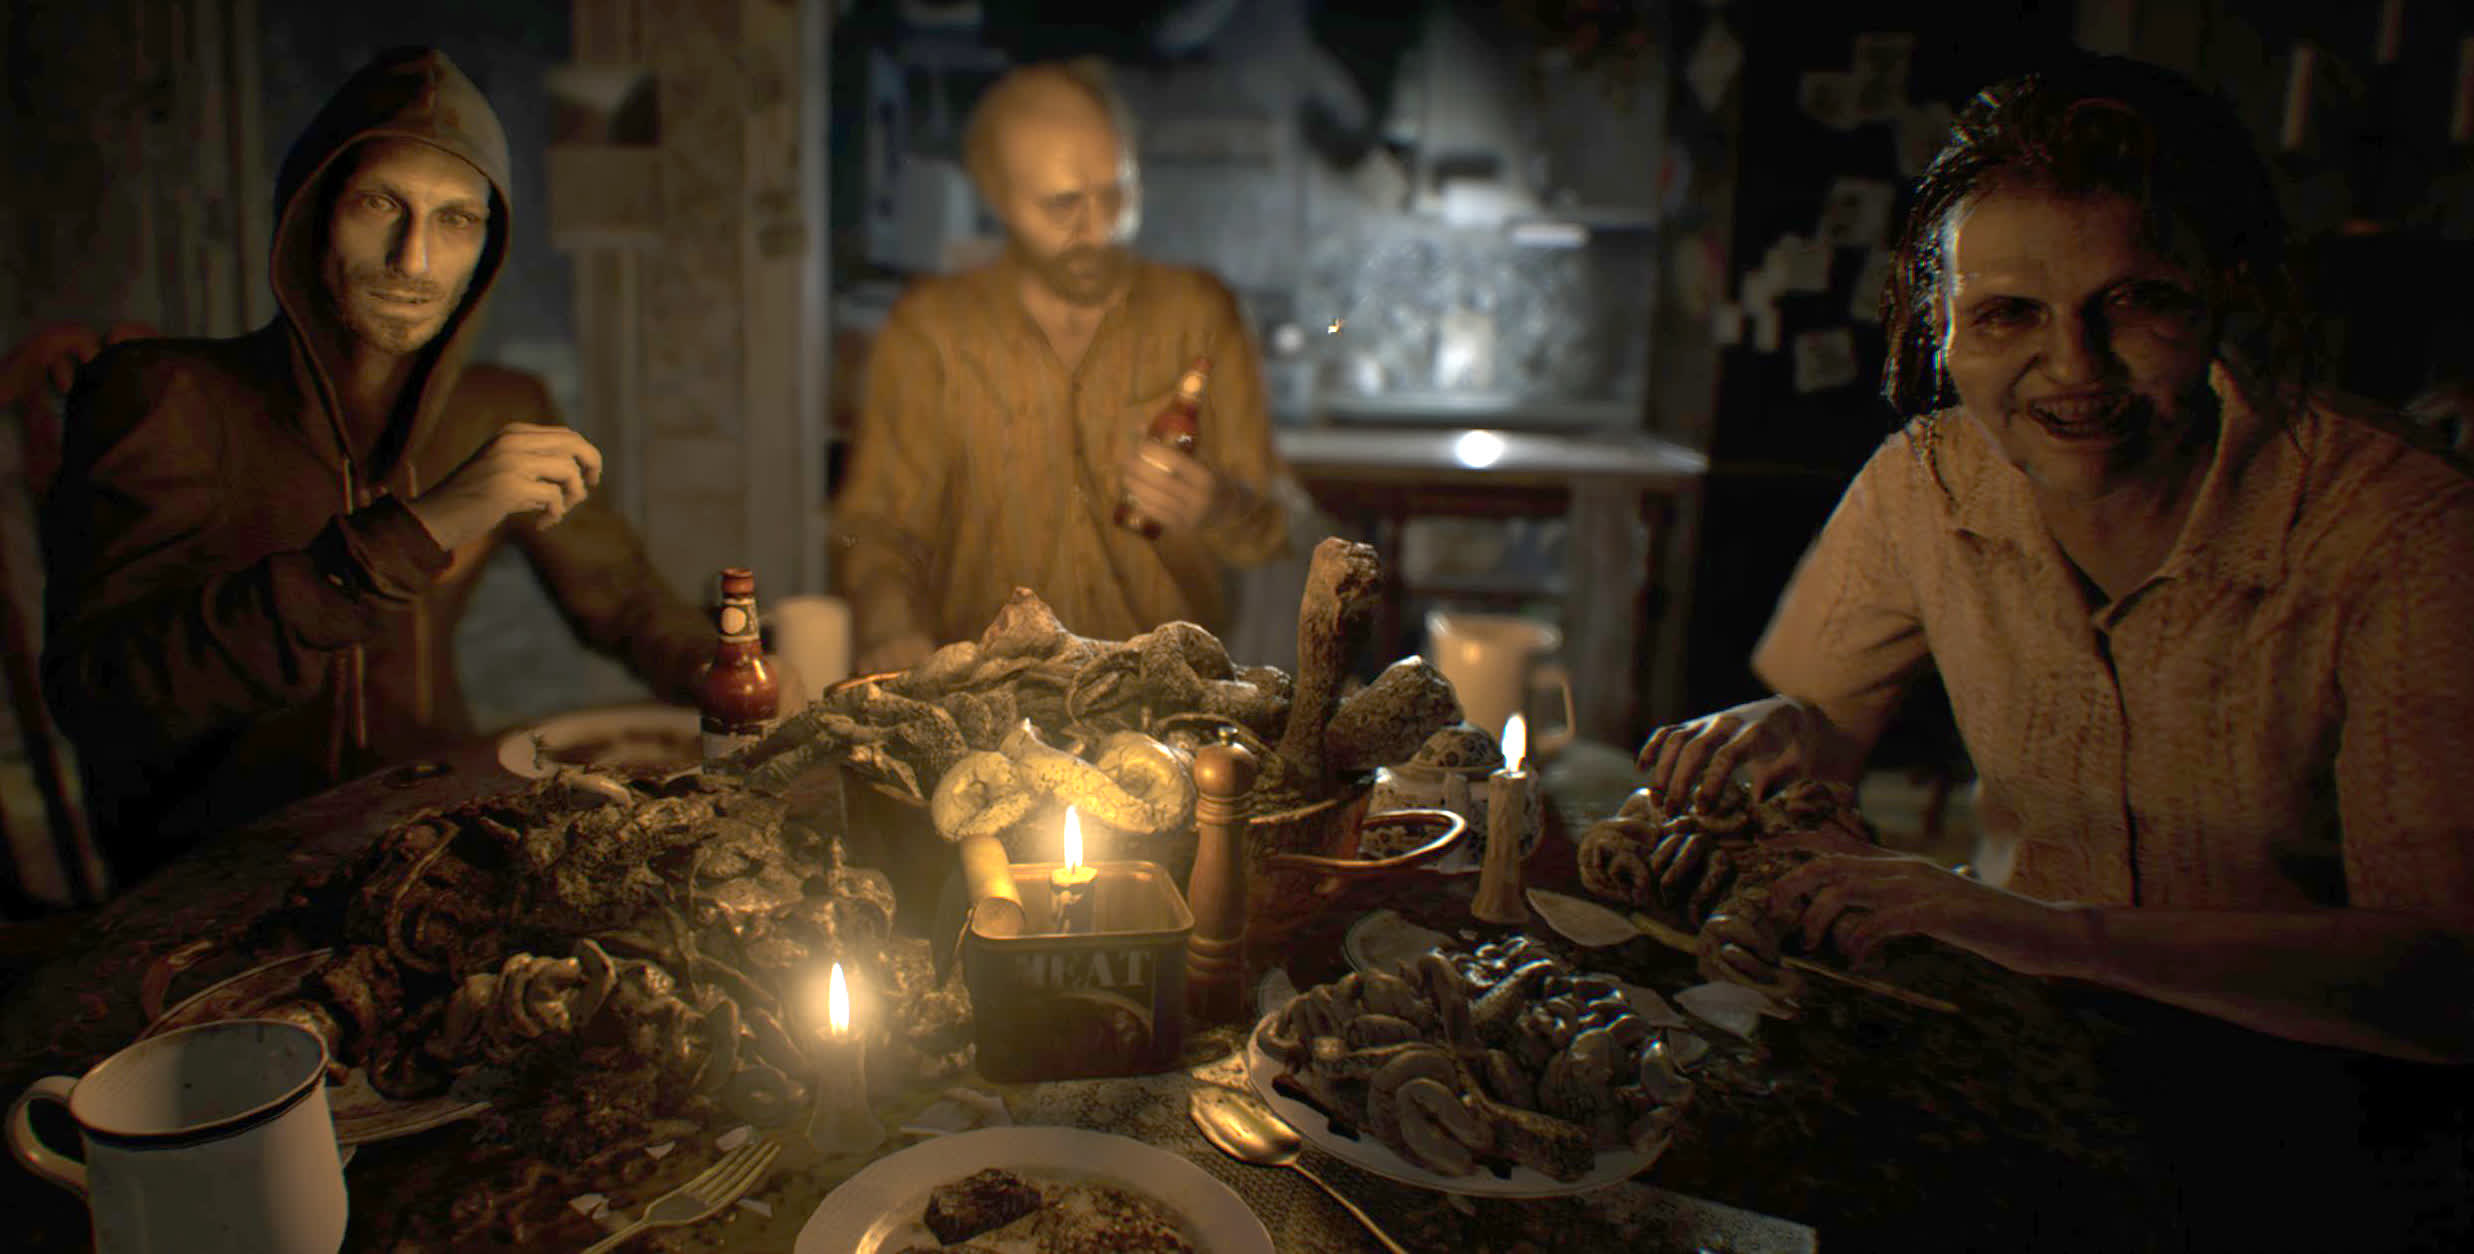 Capcom is bringing Resident Evil 7: Biohazard and the RE 2 remake to Apple platforms